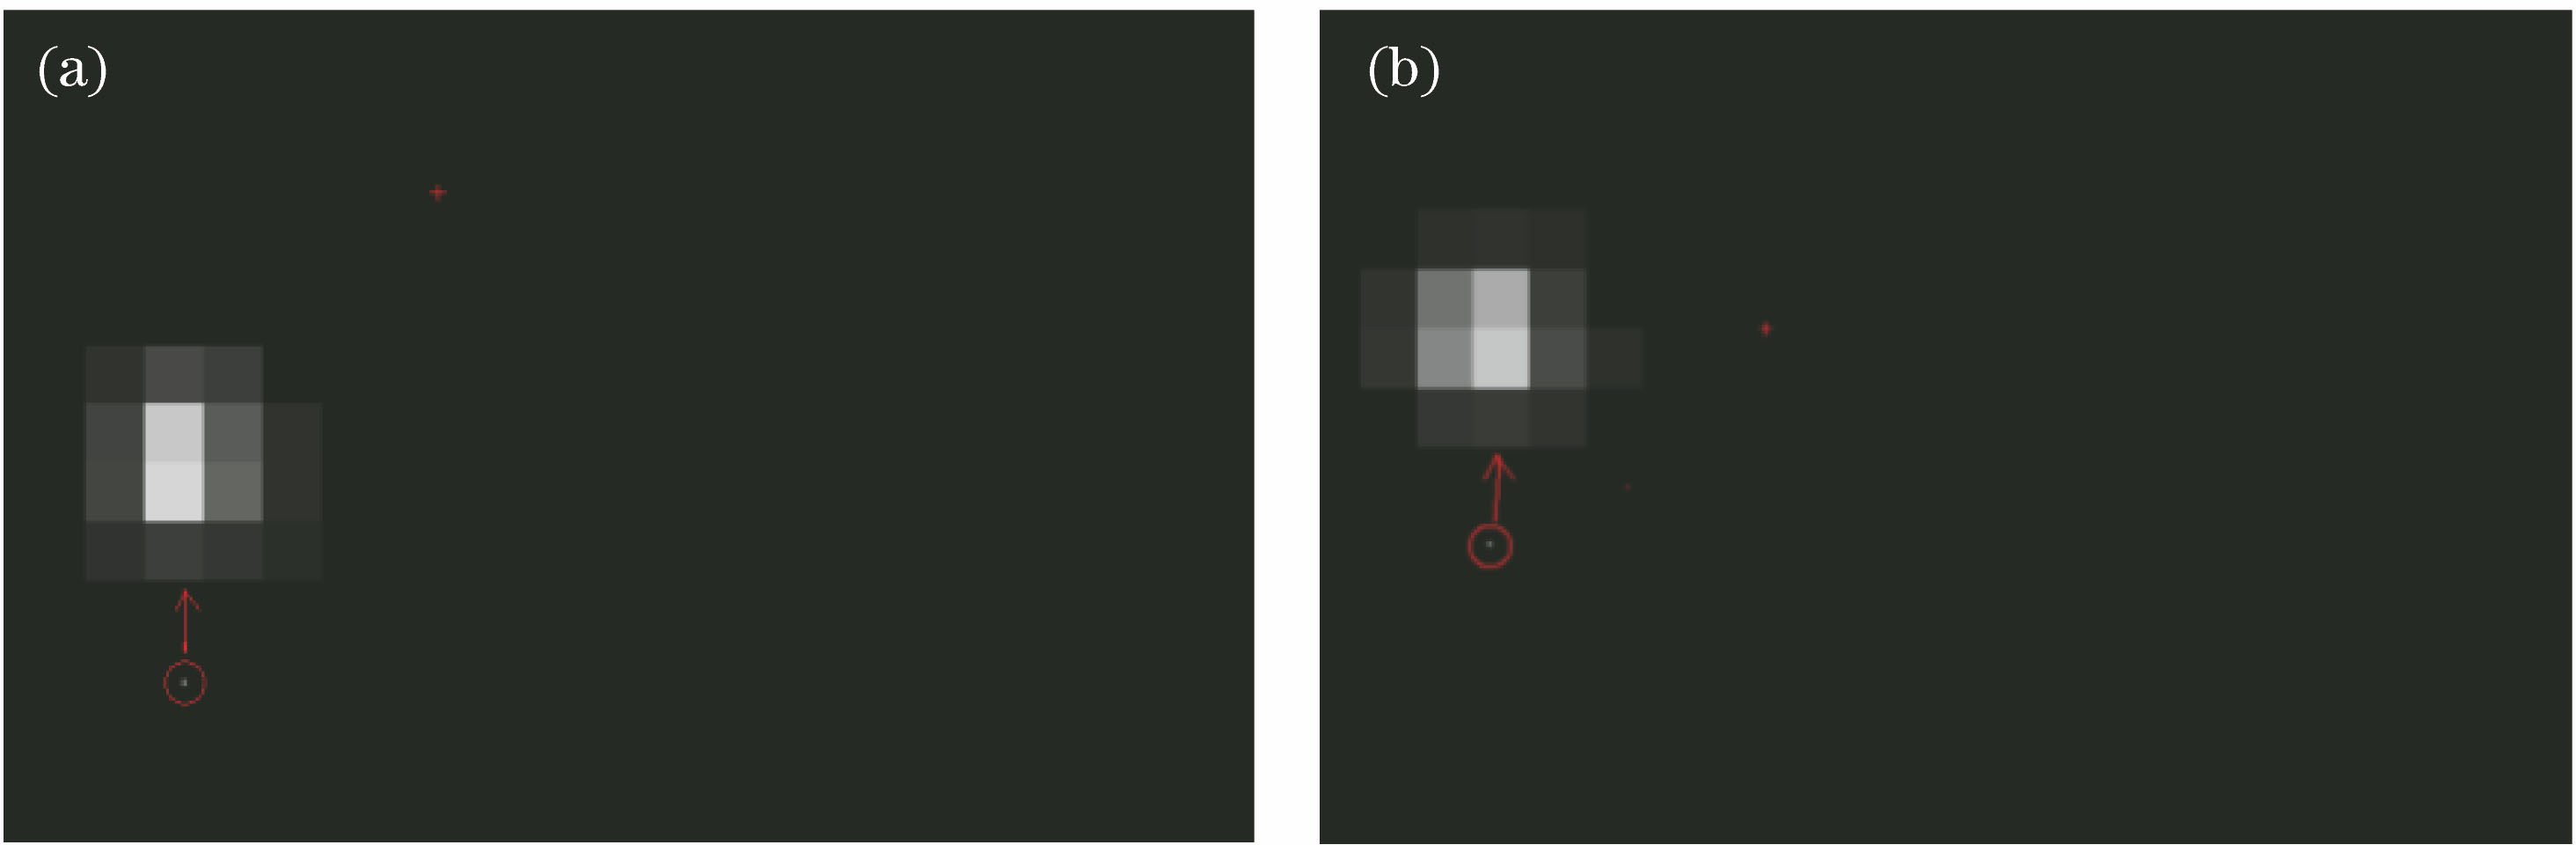 On-orbit examples of signals and ghosts. (a) Example 1; (b) example 2